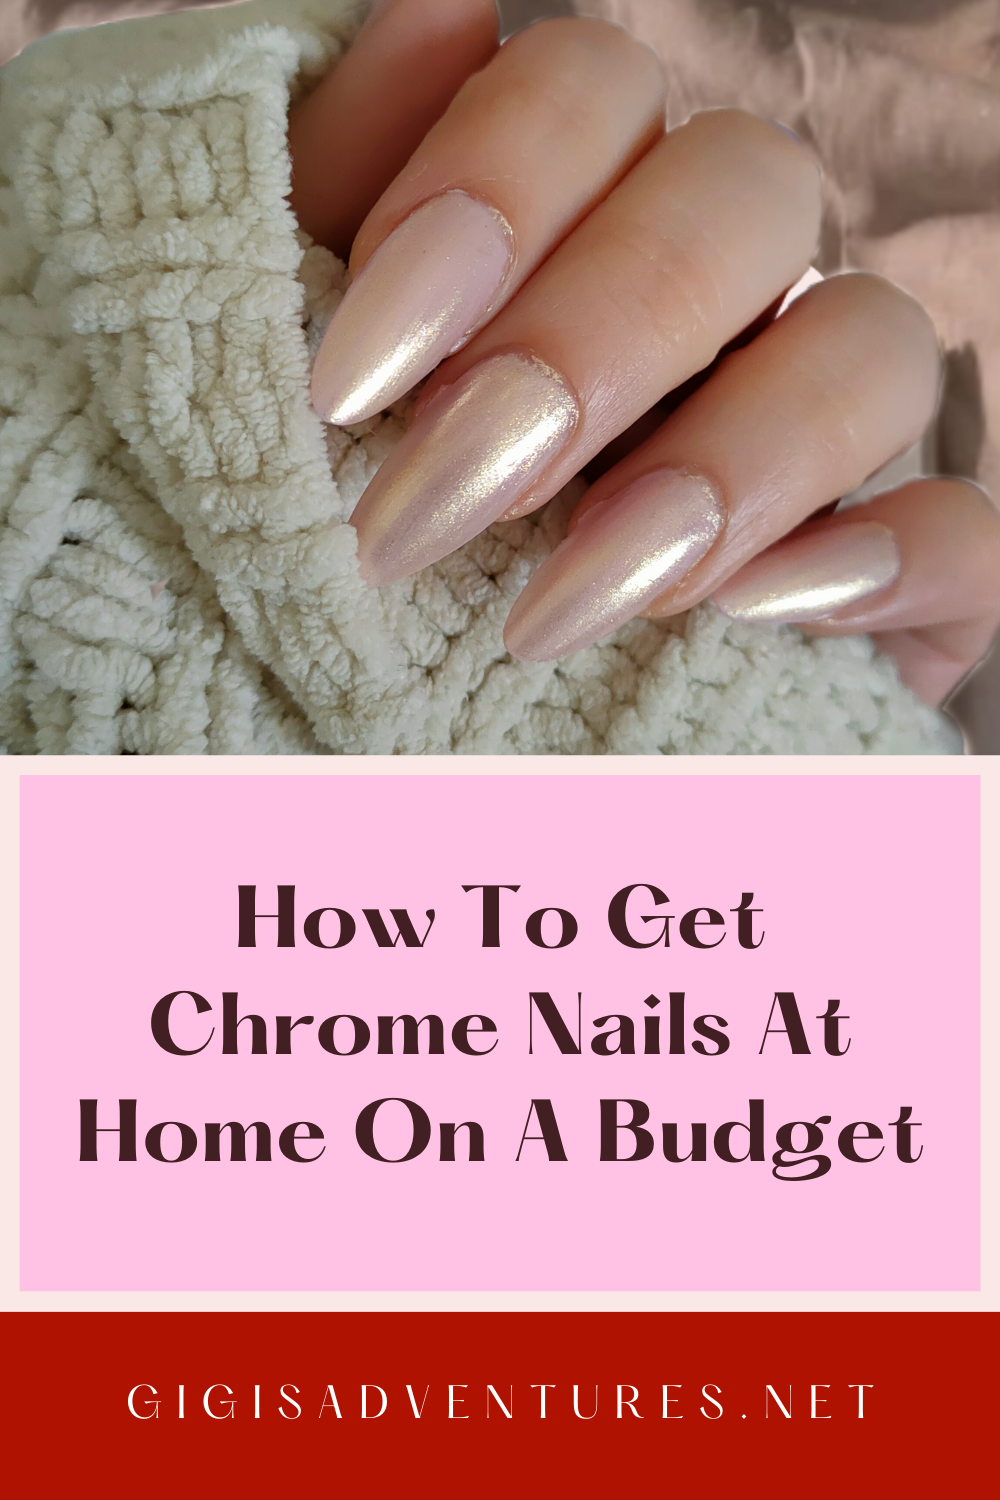 How To Get Chrome Nails At Home On A Budget